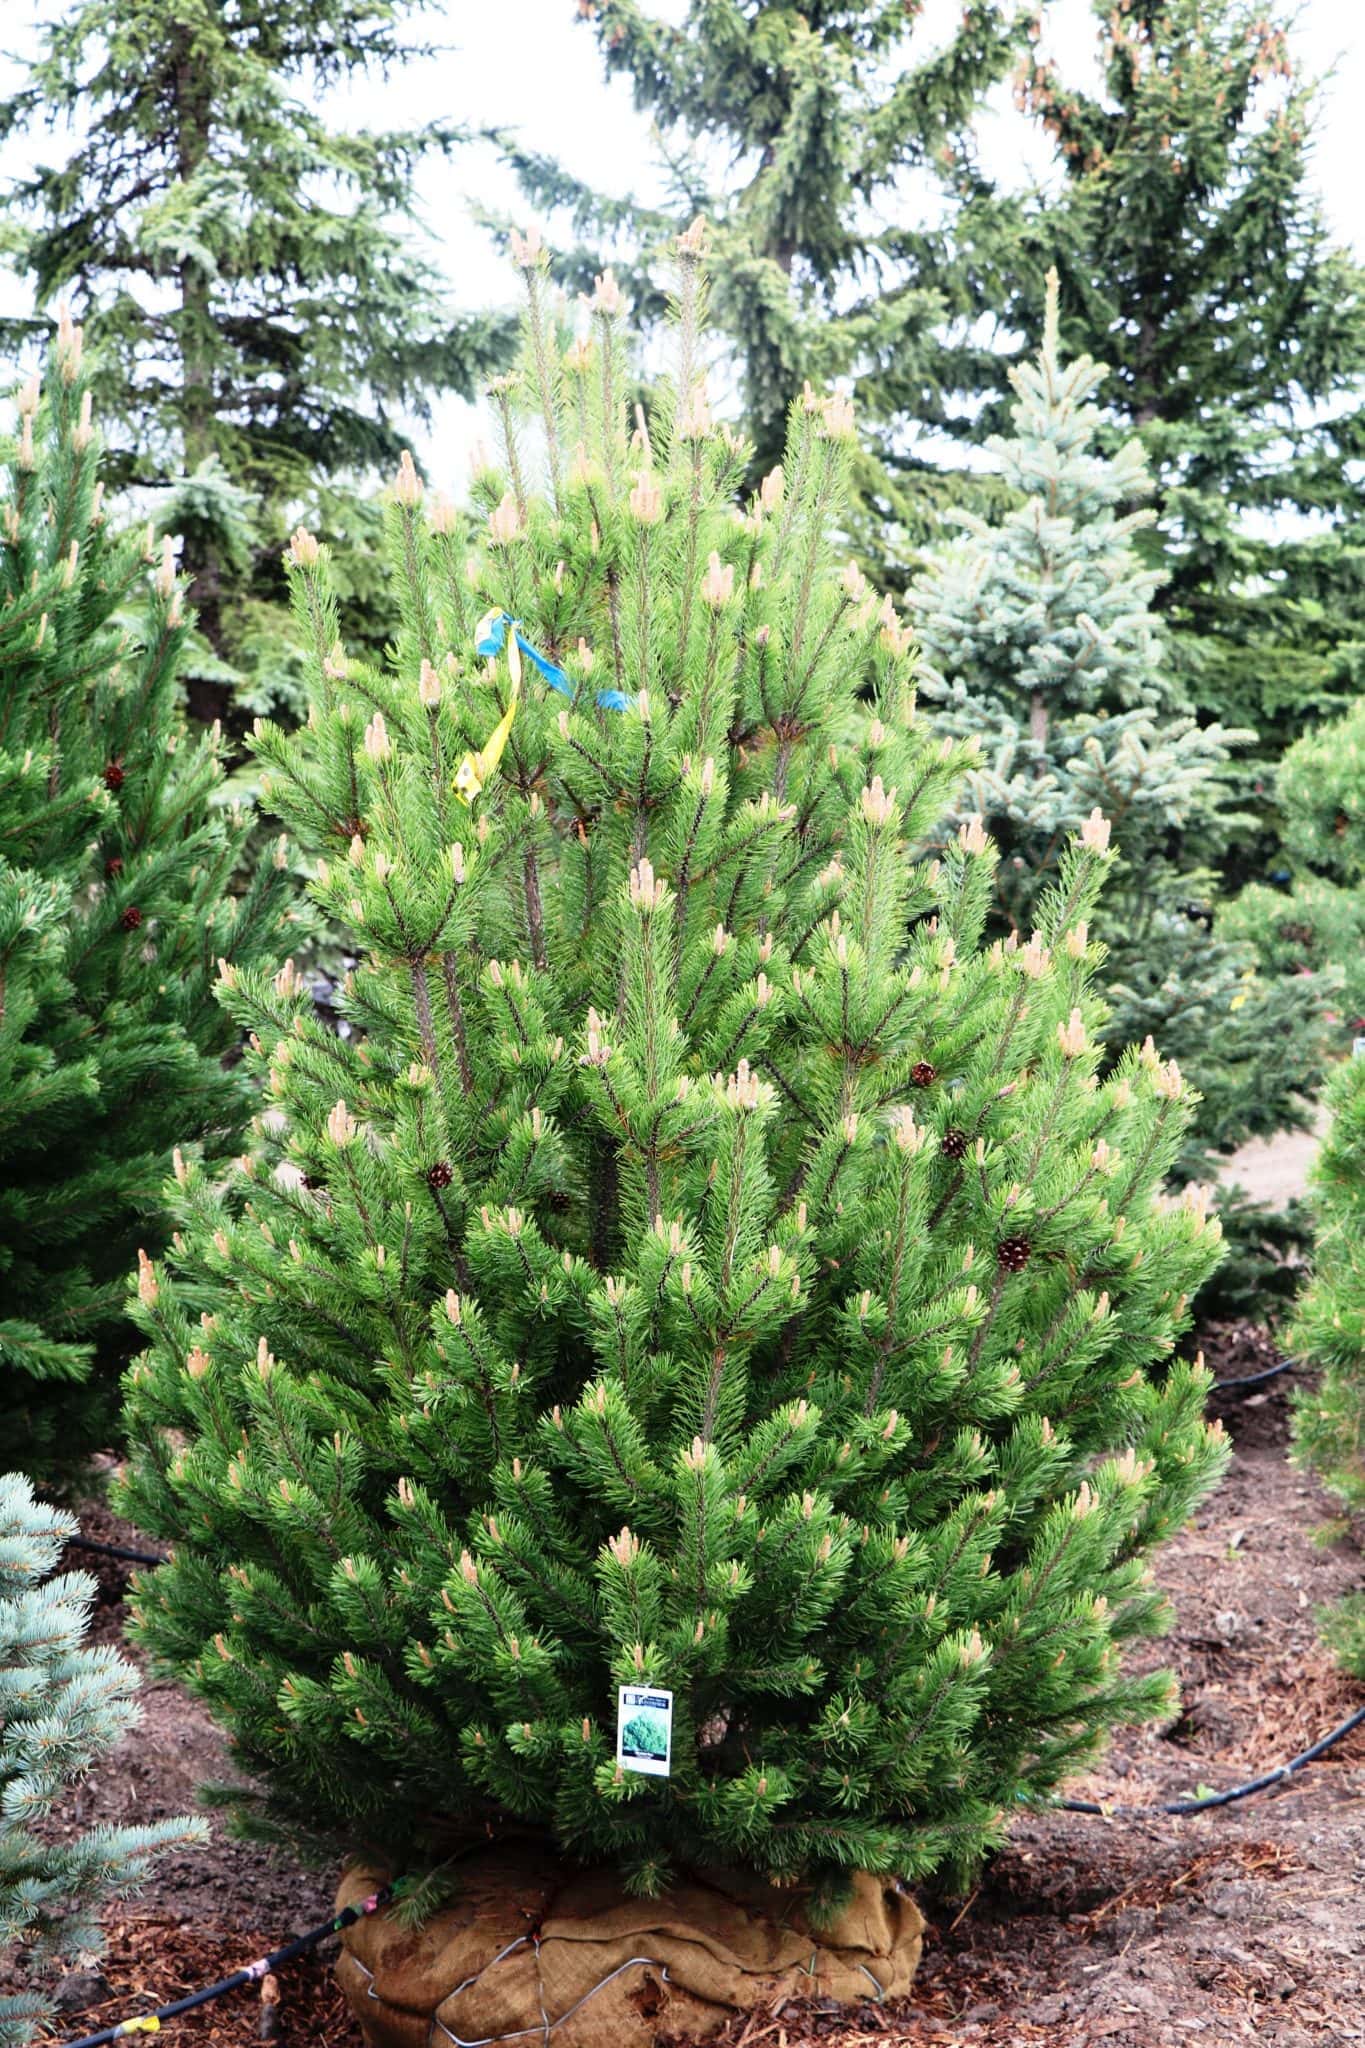 Mountain Pine is a evergreen tree with a upright spreading growth pattern.